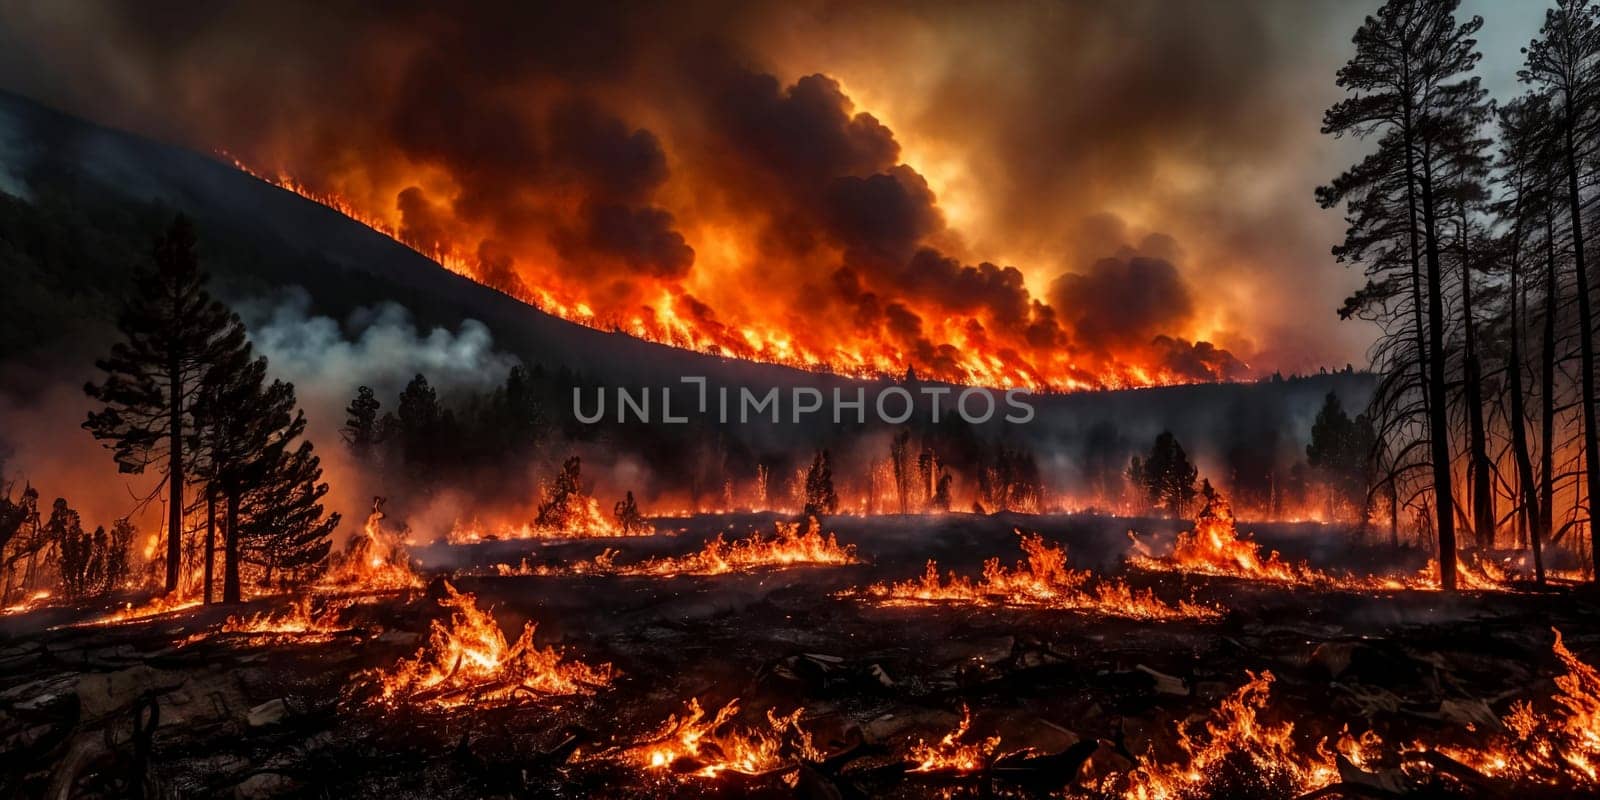 The intensity of a raging wildfire as it engulfs a forest in flames, capturing the spectacle of fiery embers and billowing smoke against a darkened sky. Panorama